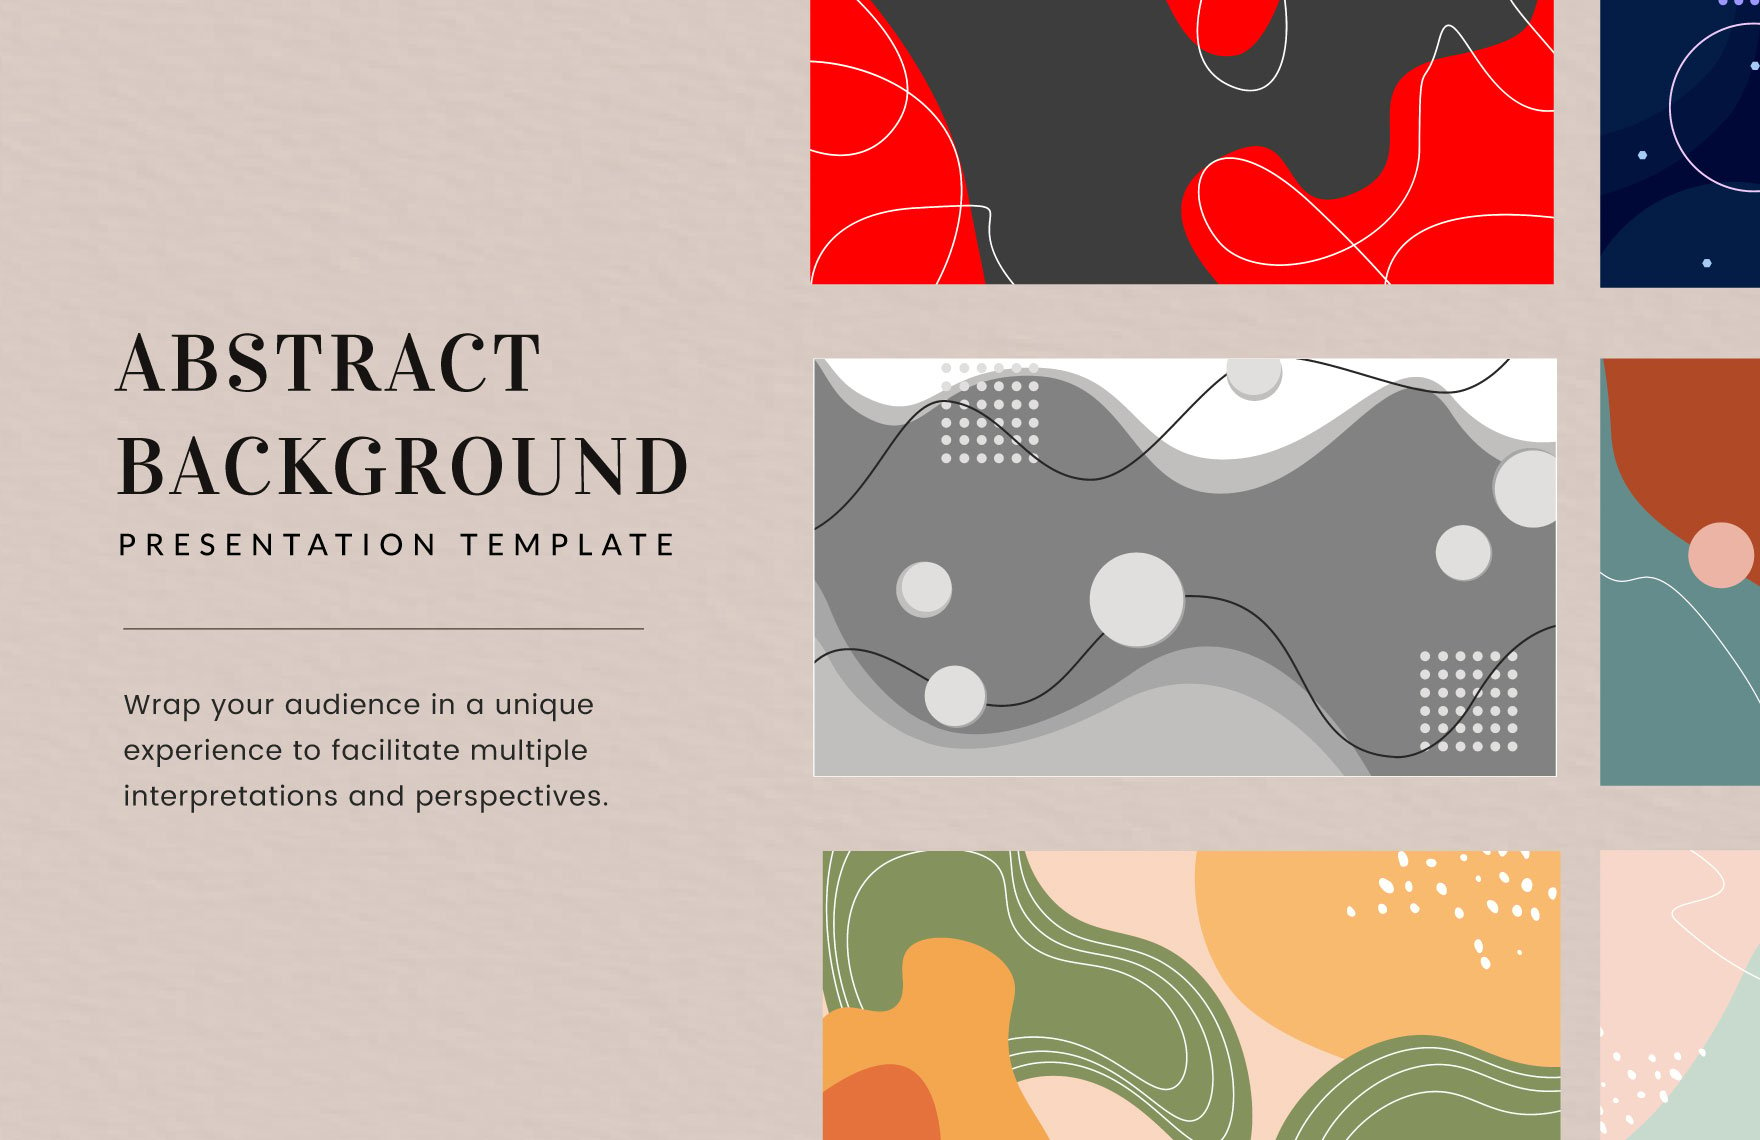 Abstract Background Presentation